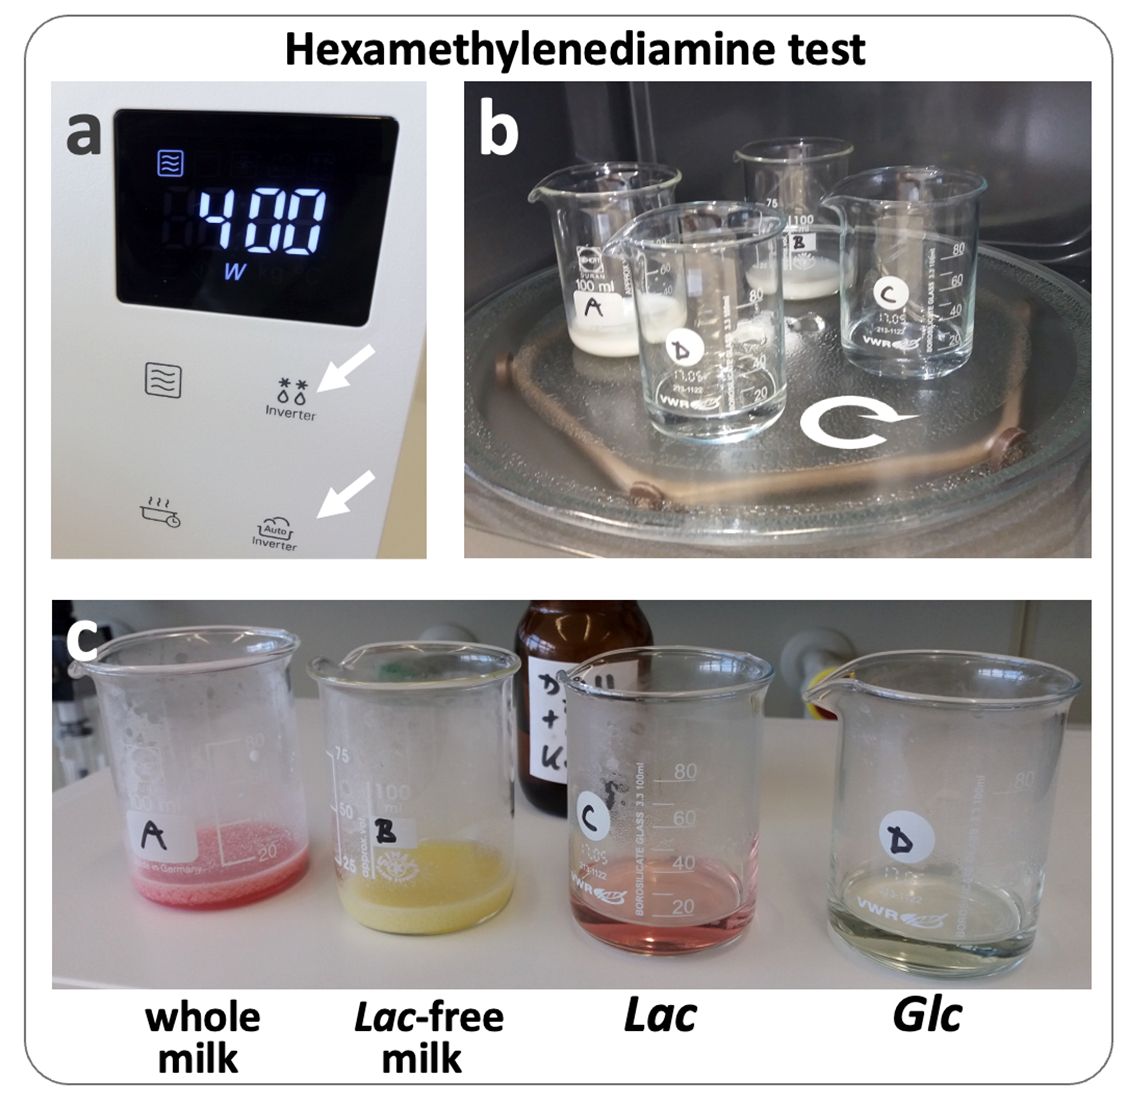 Hexamethylenediamine test with dairy products and sugar solutions